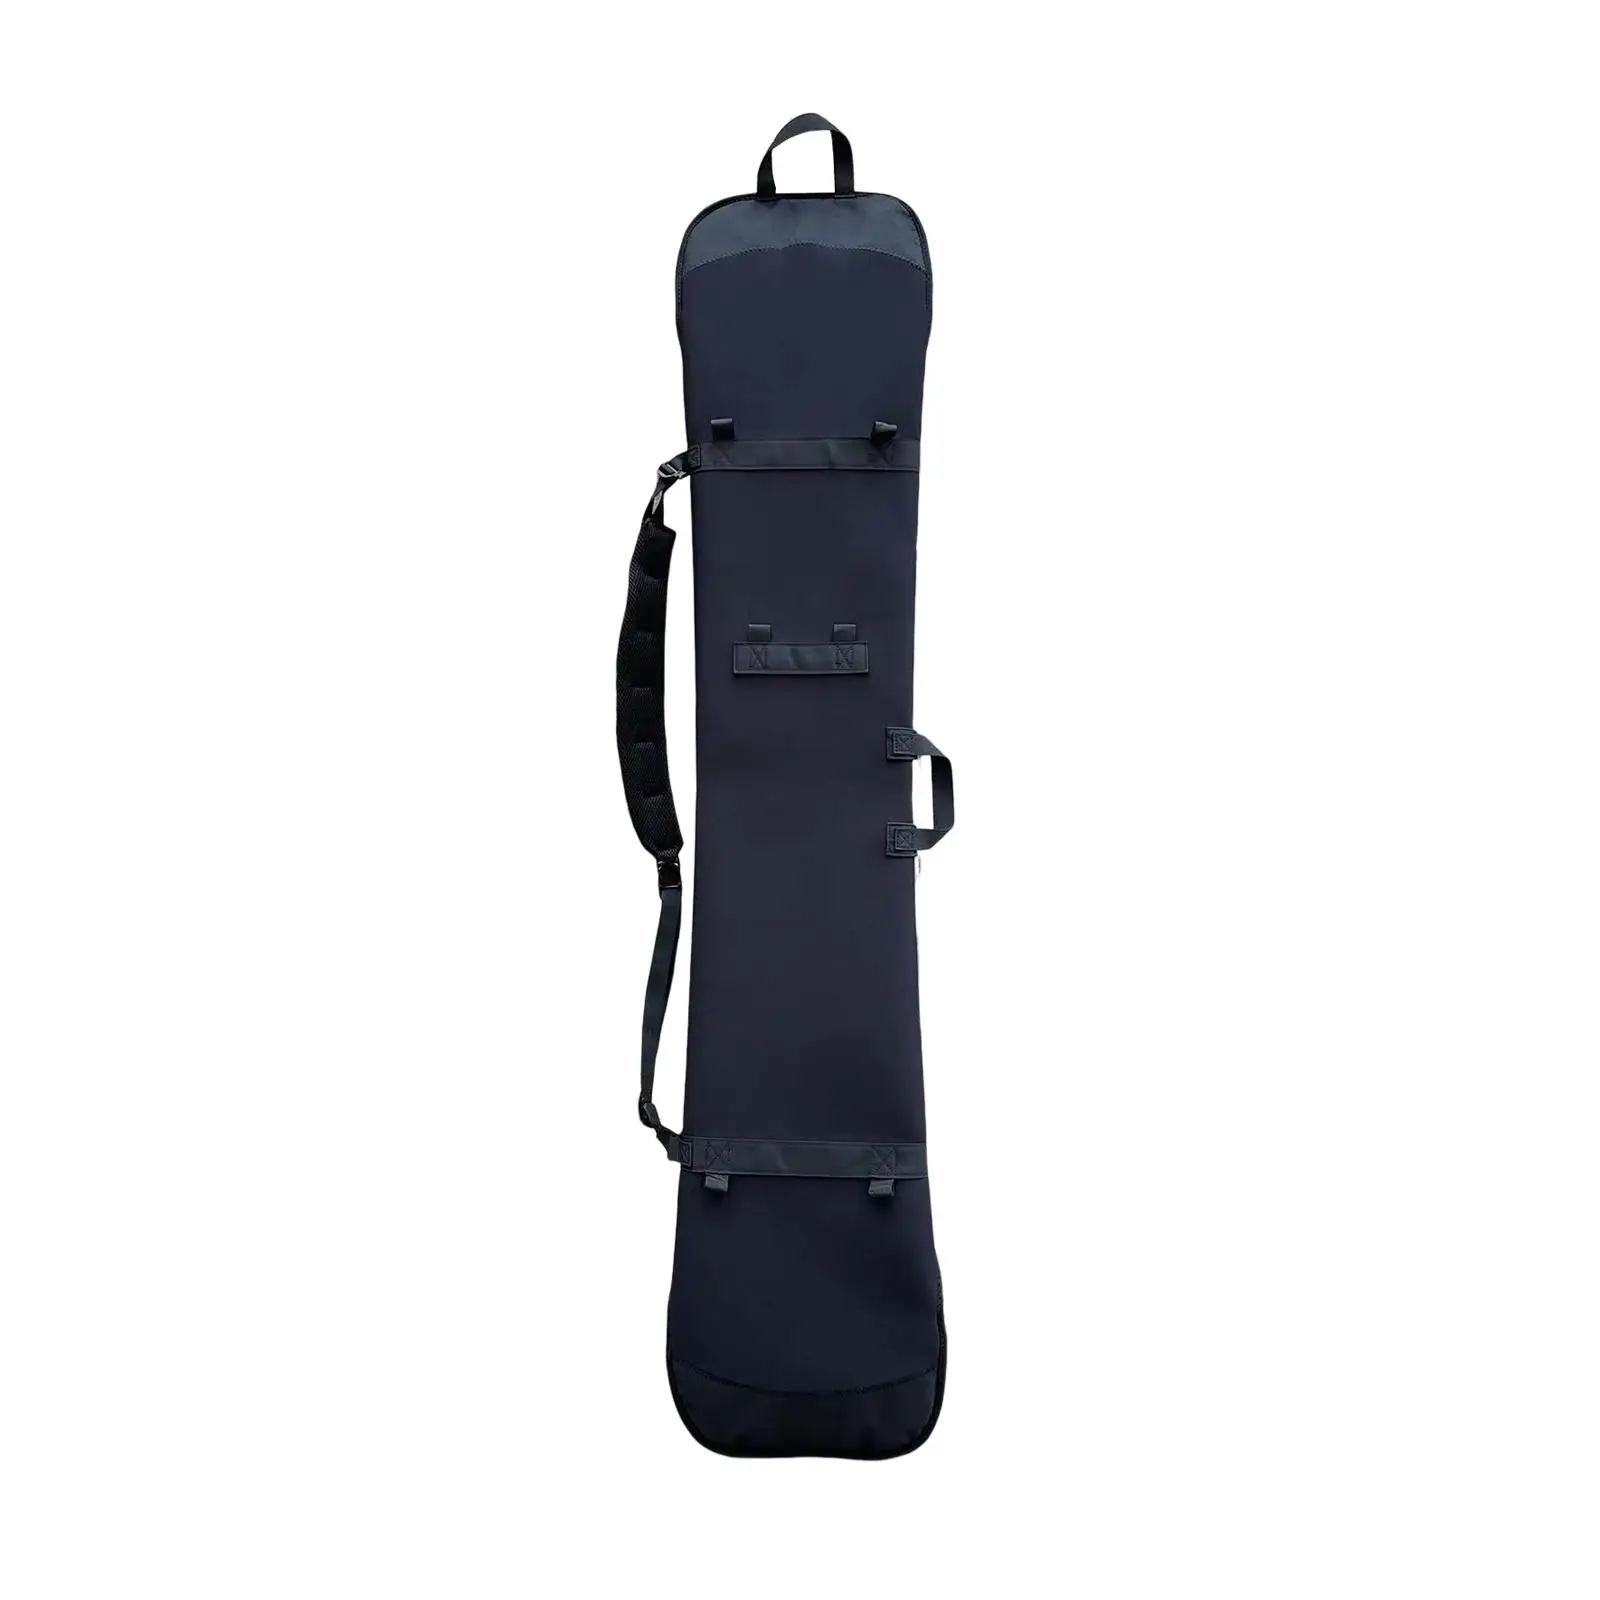 163cm to 174cm Snowboard Bag Adjustable Belt Carrying Bag Protector Zipper Storage Portable Cover for Traveling Winter Luggage